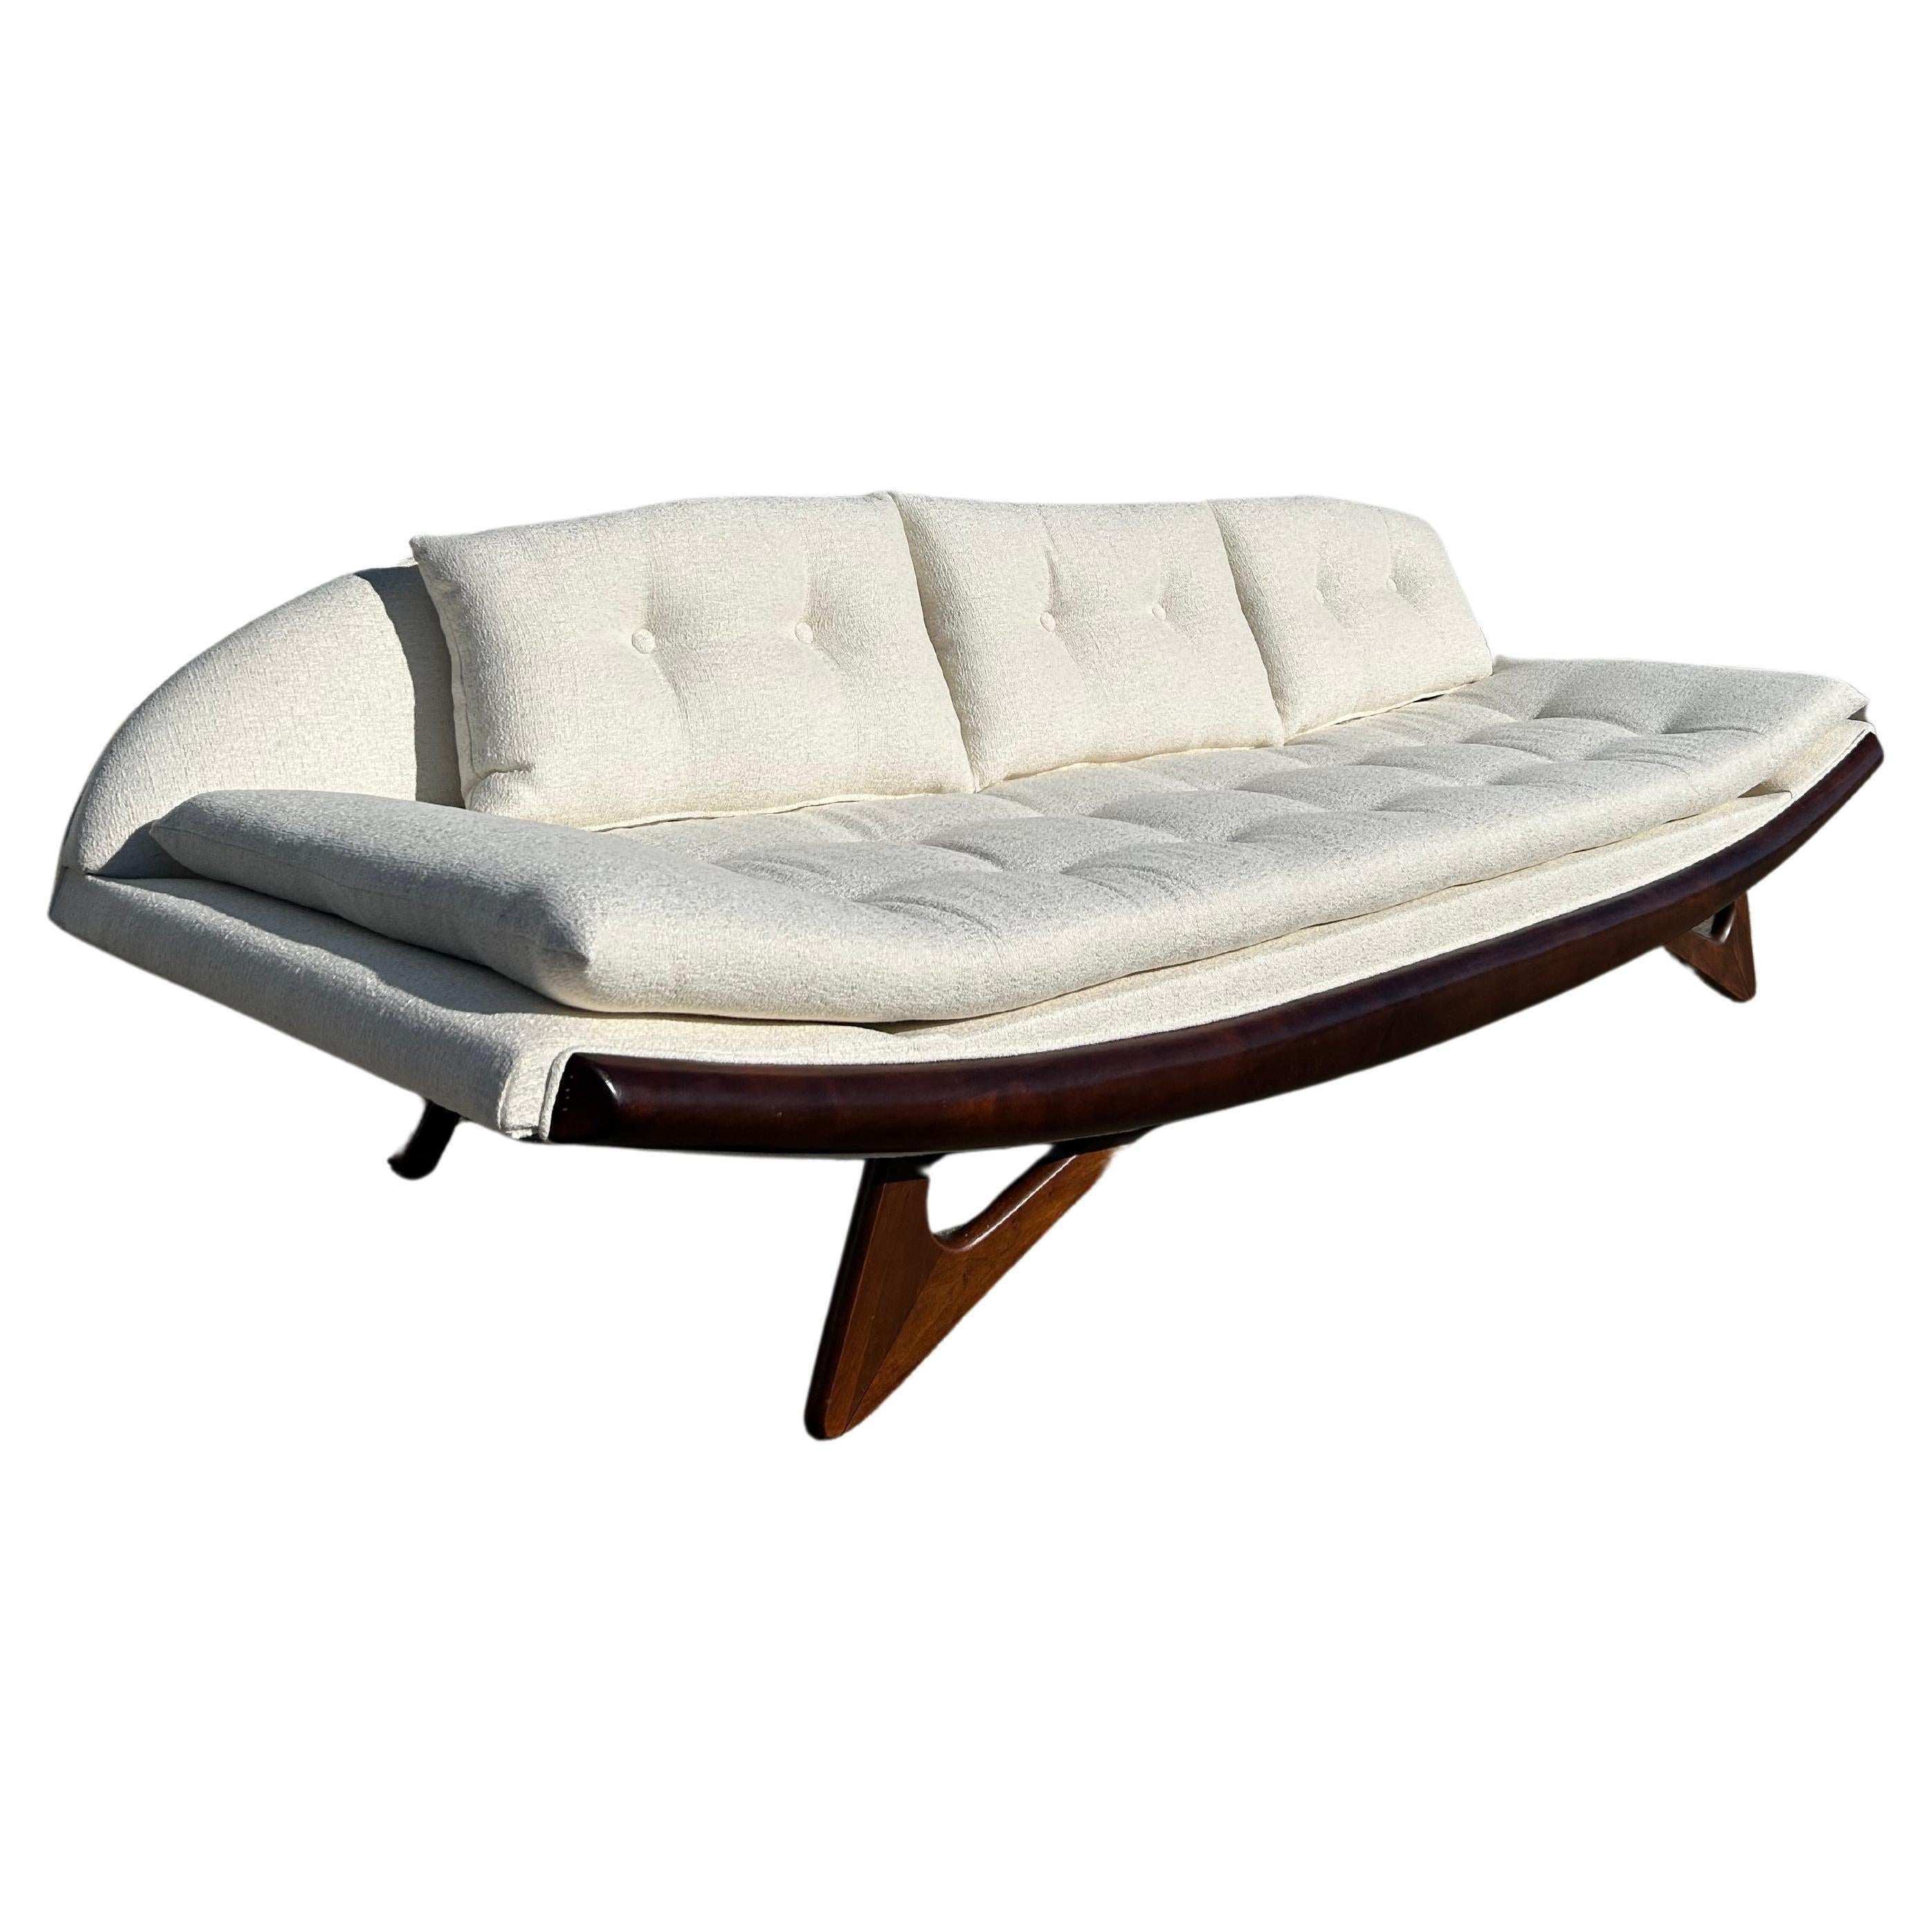 The epitome of mid-century modern design is the Armless Gondola designed by Adrian Pearsall for Craft Associates in the 1960s.  This specific unit has been expertly restored by Copley Upholstery Inc. in Medina, Ohio.

The fabric selected is a